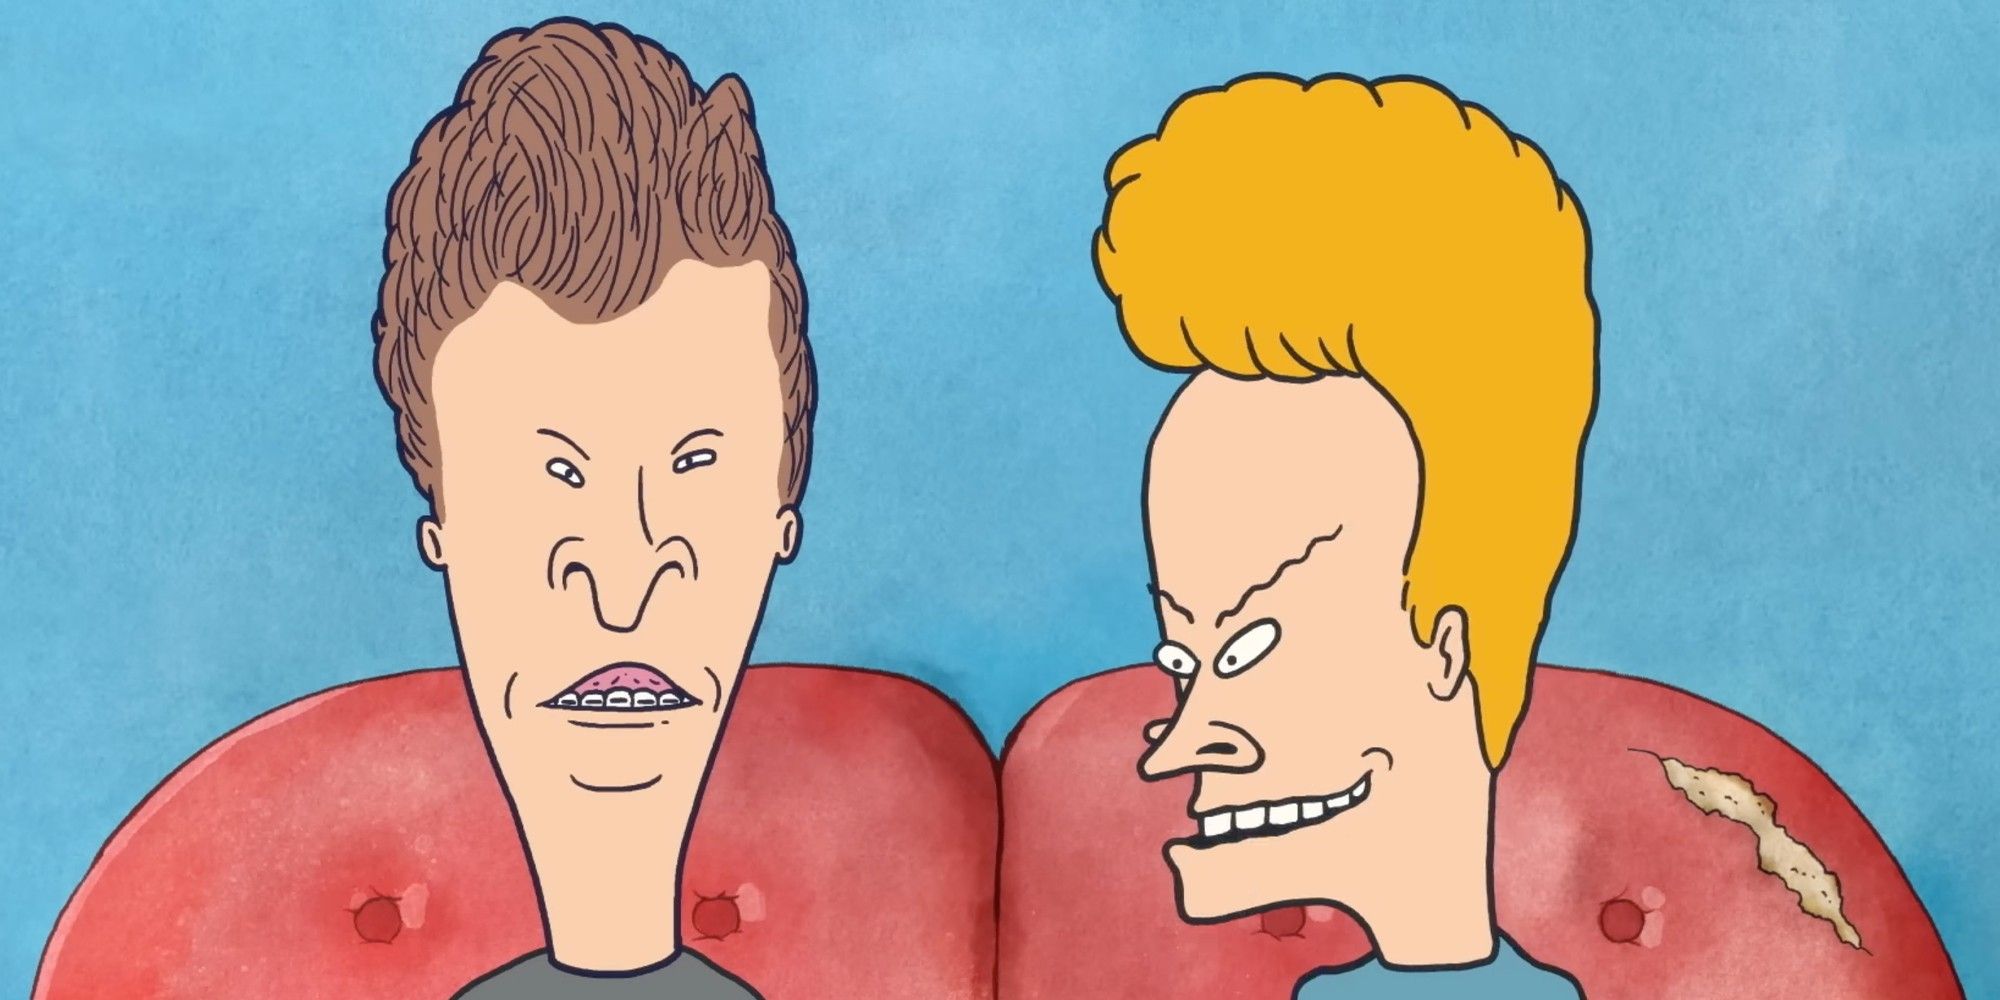 Beavis and Butthead in Mike Judge's Beavis and Butthead